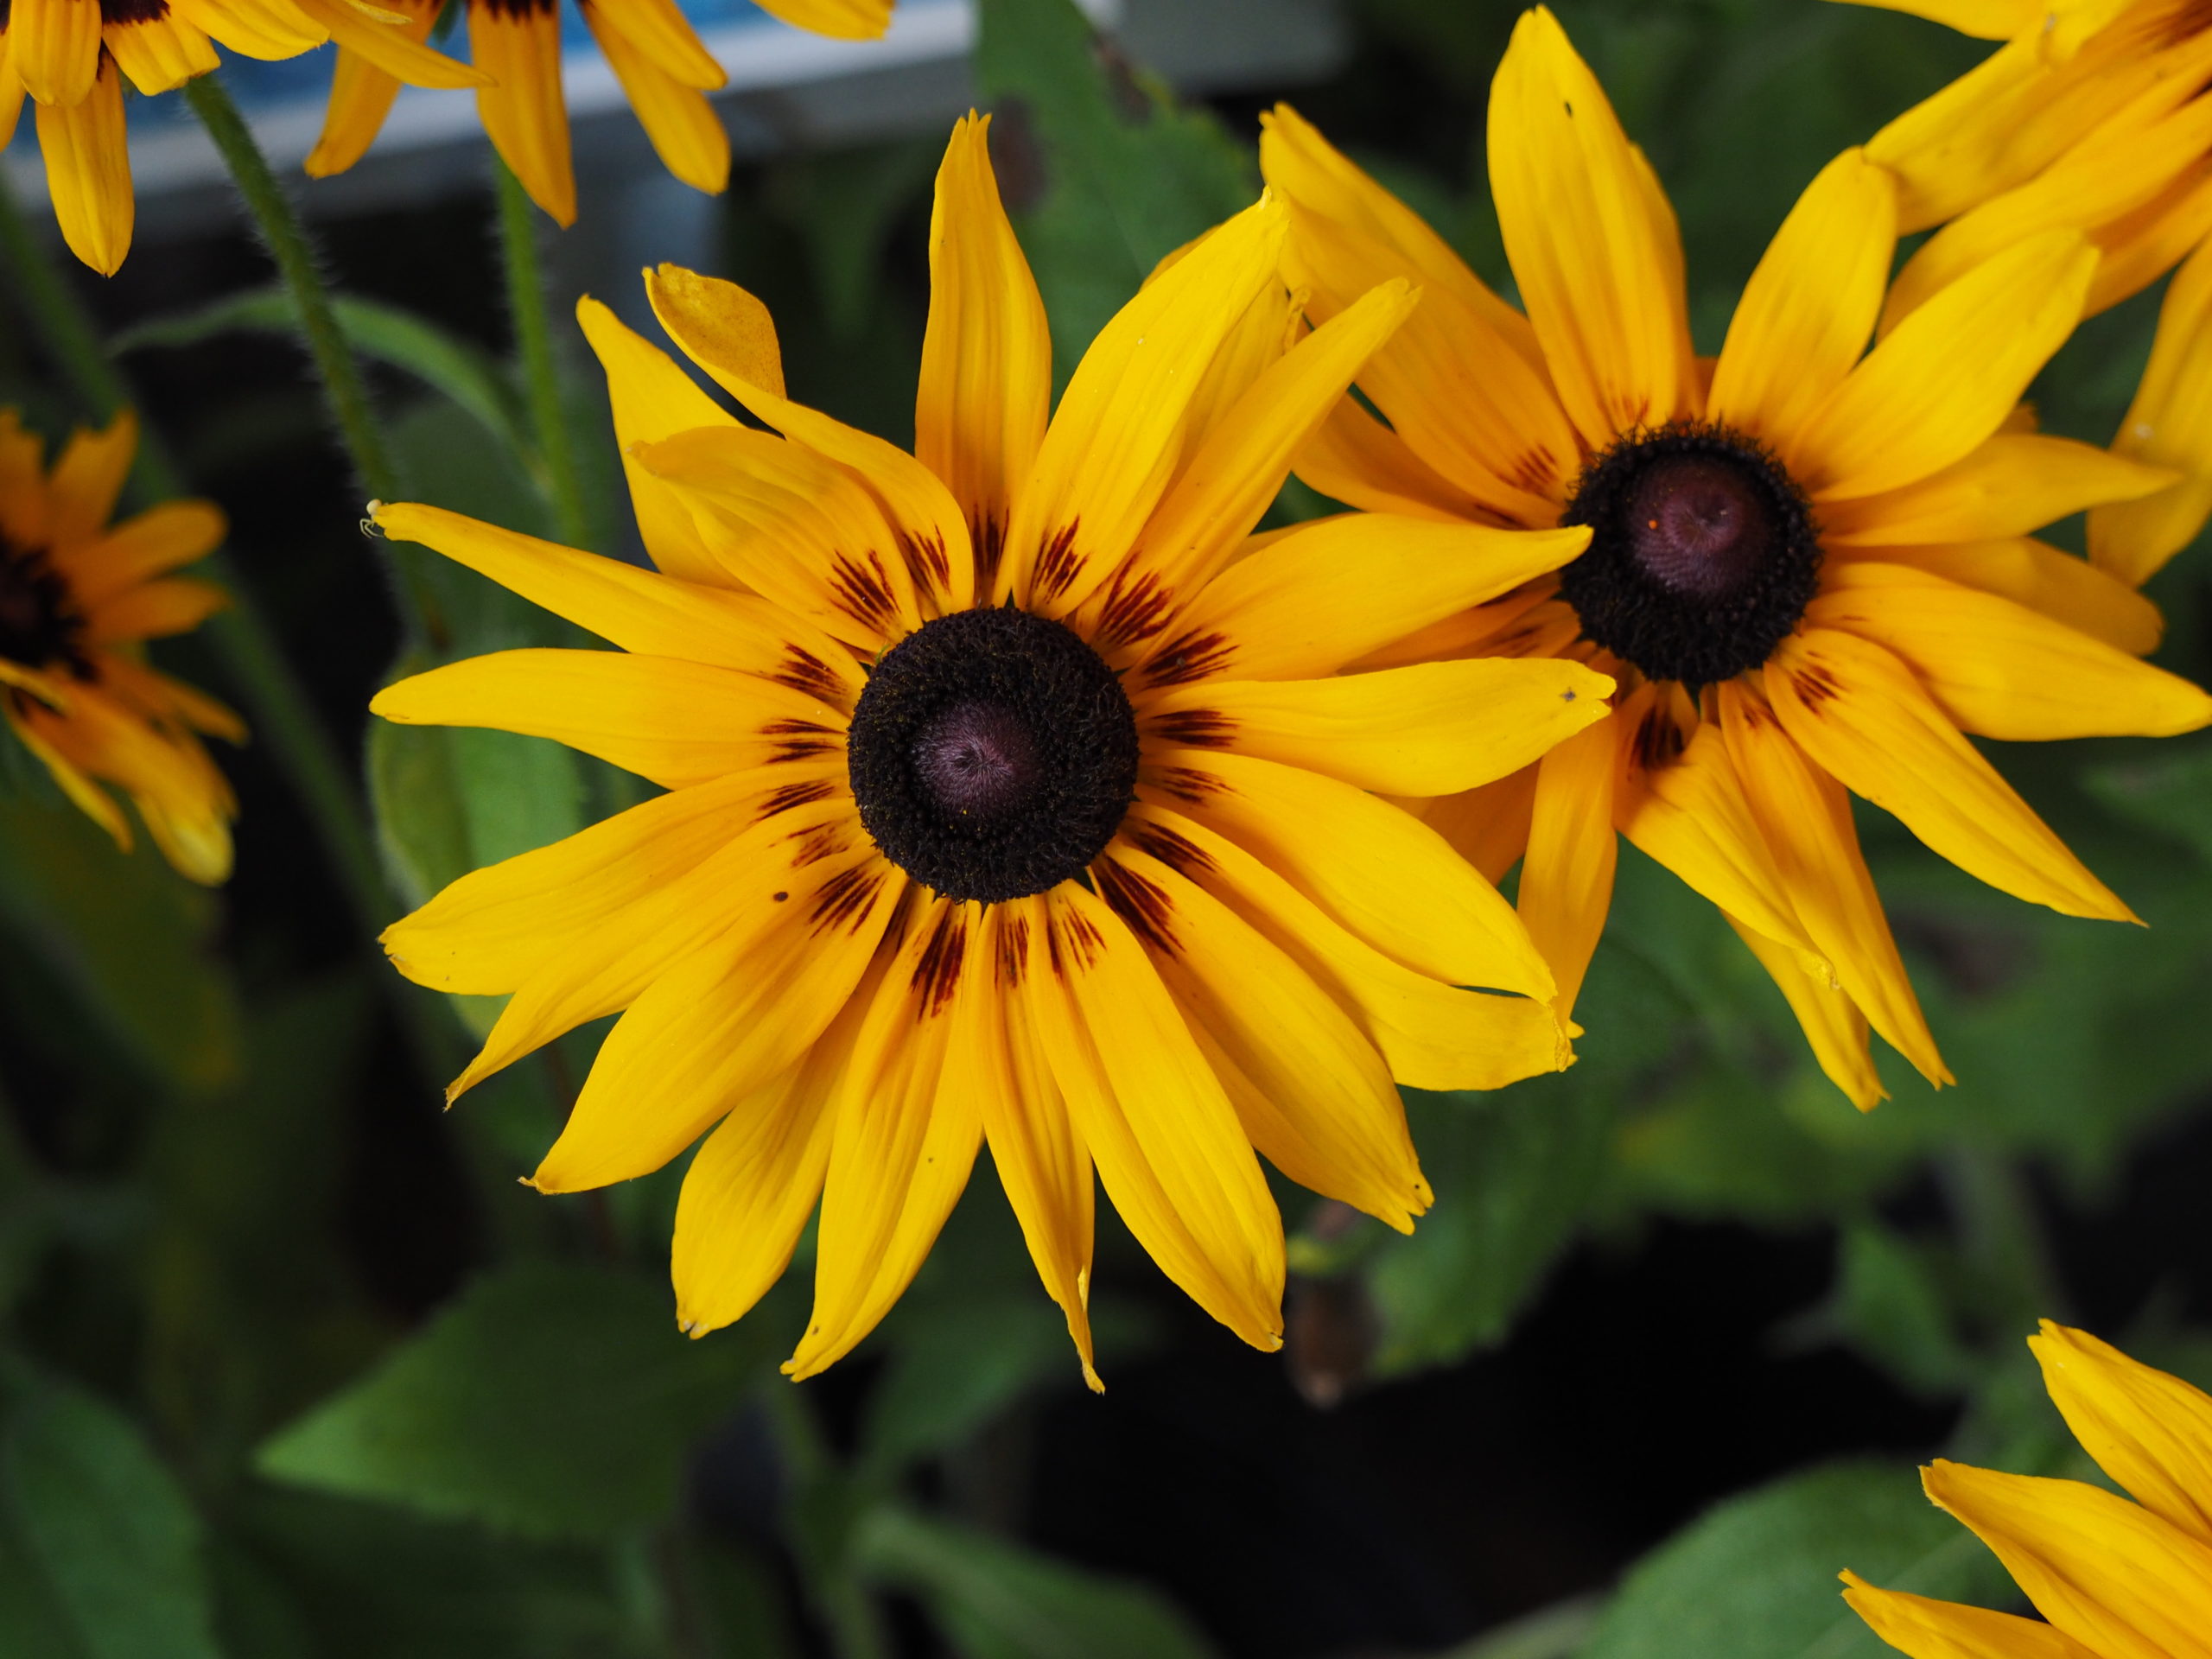 Black-eyed Susans (Rudbeckia sp.) both the annual and perennial types, make great cuts with long wiry stems. Colors range from the classic yellow with the brown “button” as seen here to bi-colors, tri-colors and mixed colors. Flowers last for as long as a week in the vase.